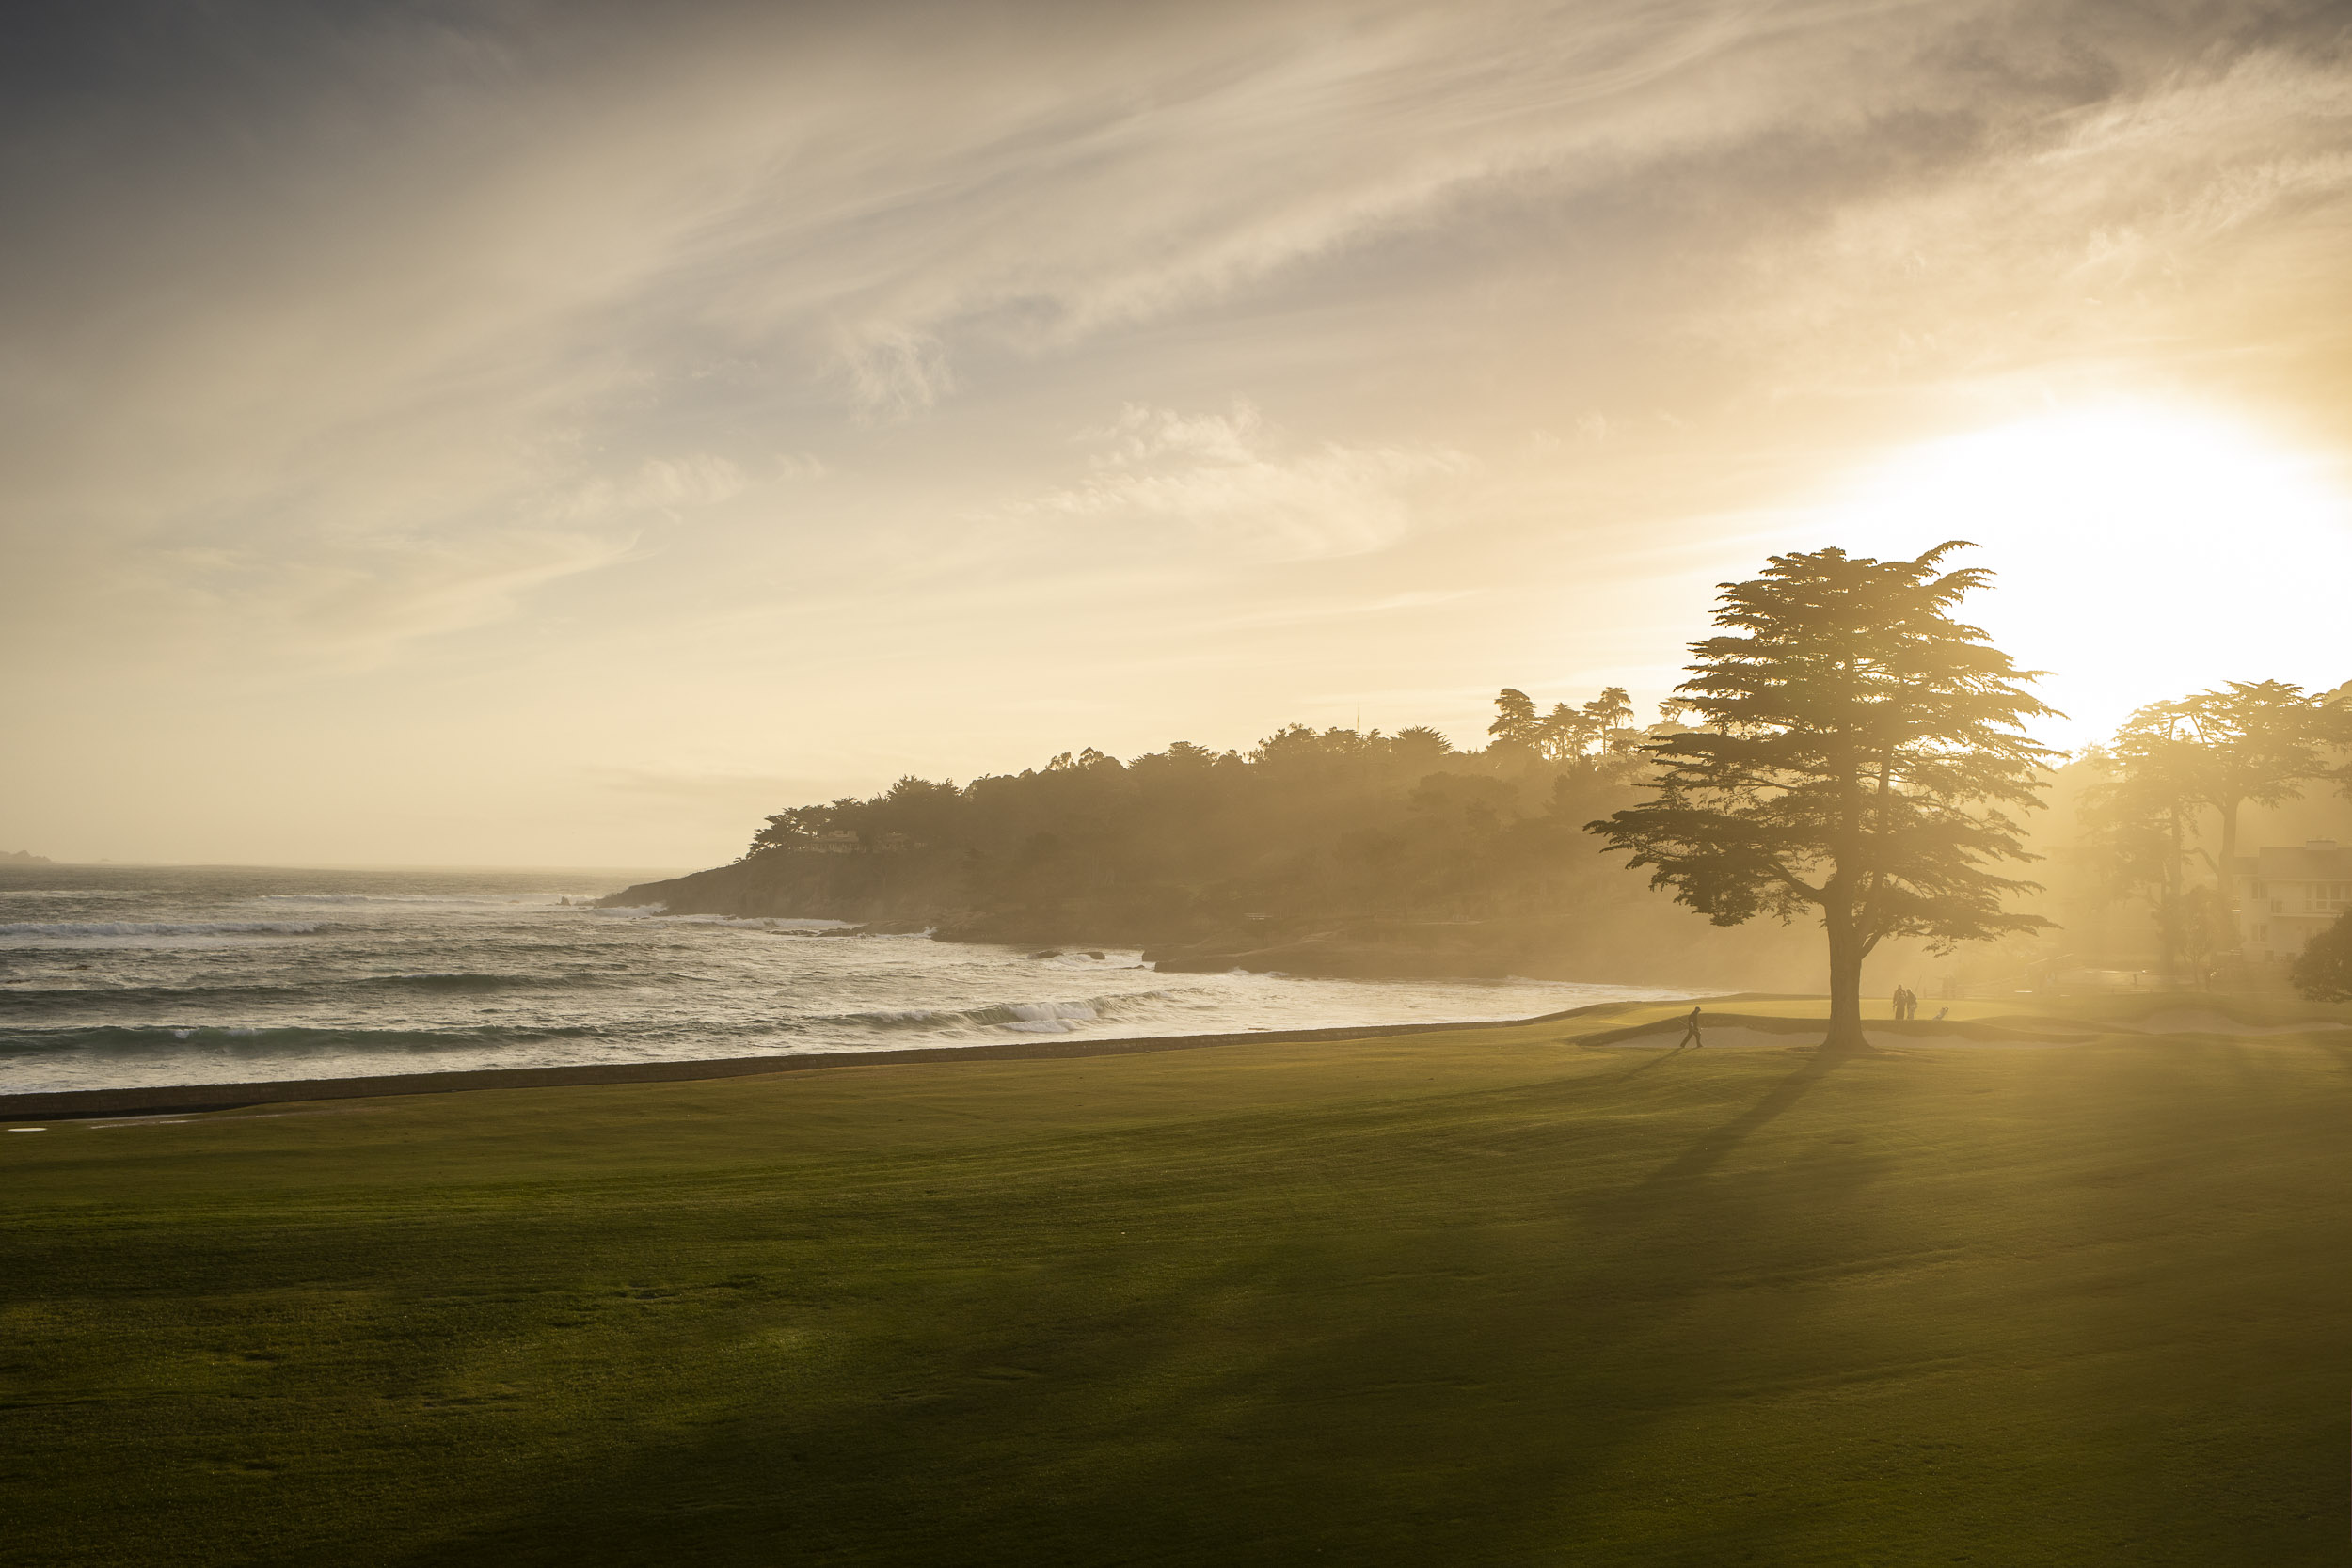 The sun sets over the icon 18th green at Pebble Beach.